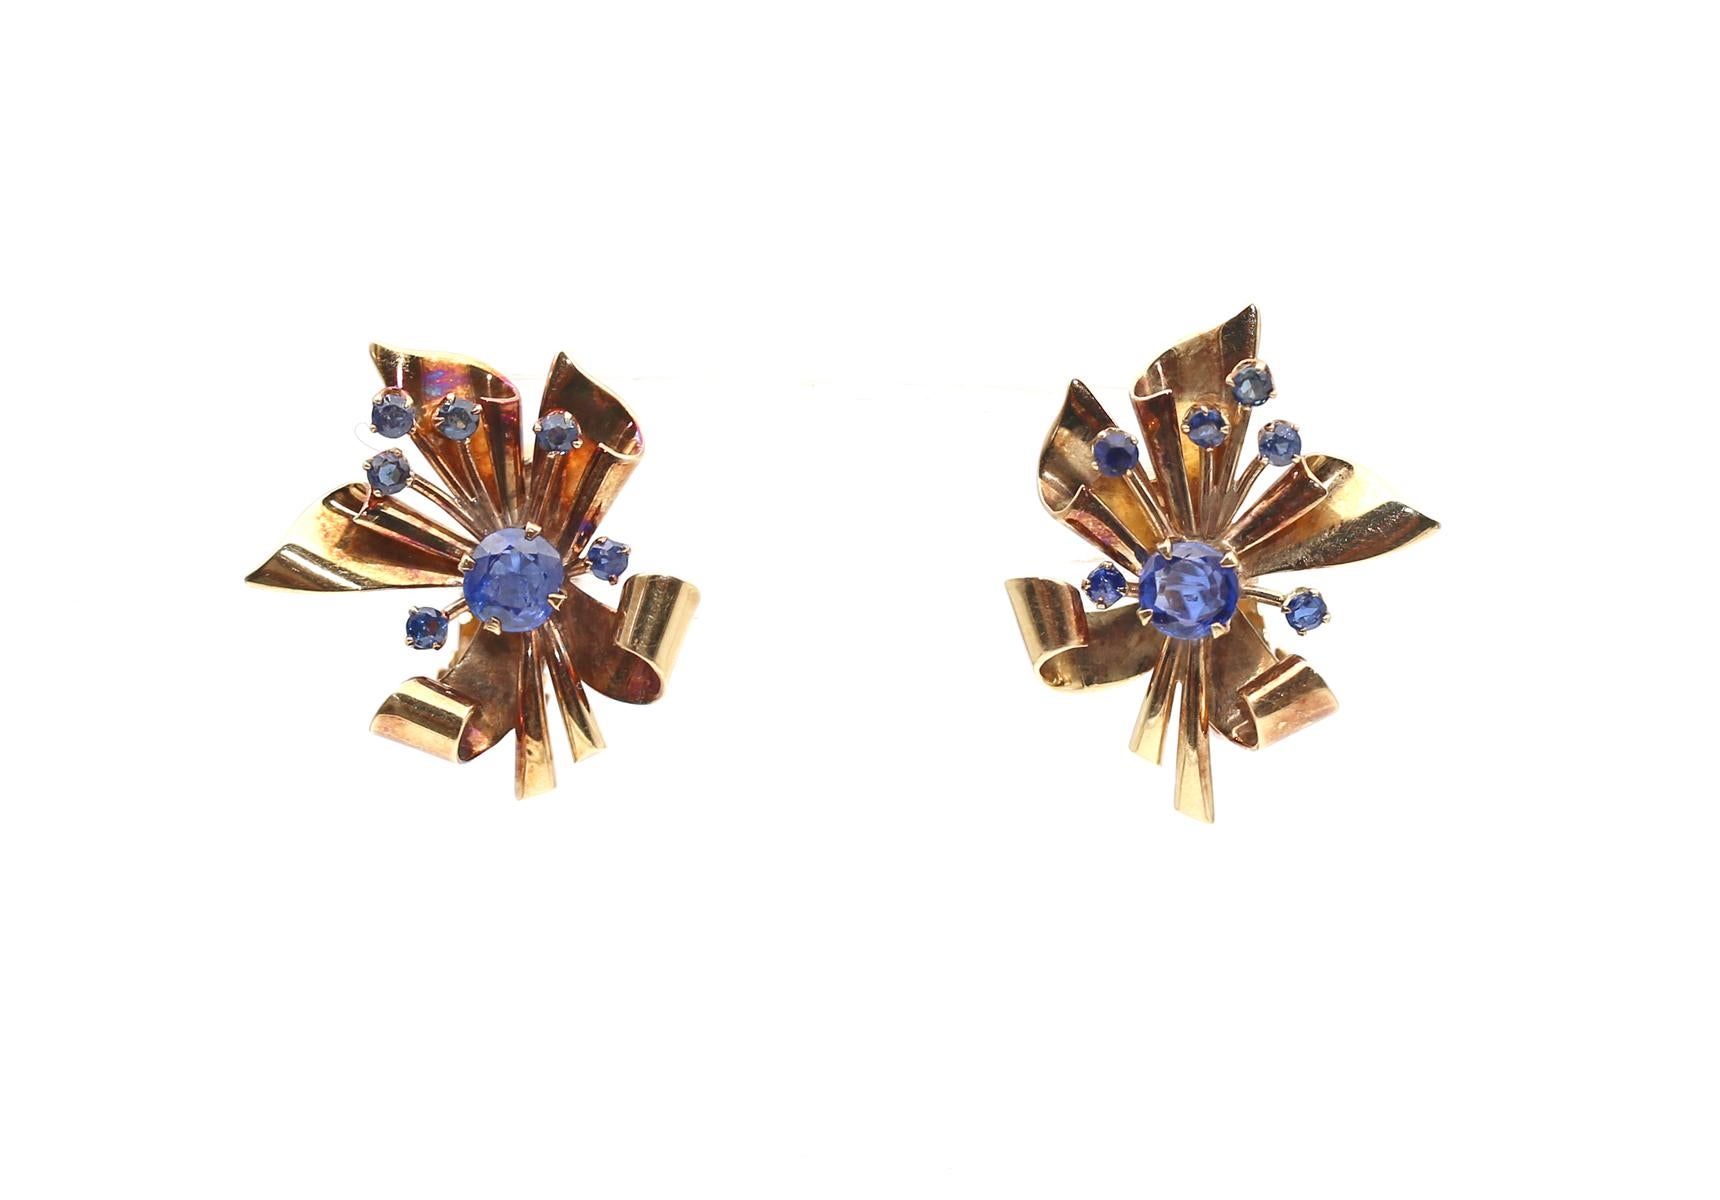 Vintage 14K Gold Sapphire Flower Earrings Marked, 1950

A Pair of Retro 14K Gold and Sapphire Earrings 14 Karats Yellow Gold. Designed as a flower with a round cut Sapphire in the middle and accented by tiny Sapphires. Marked.

These wonderfully